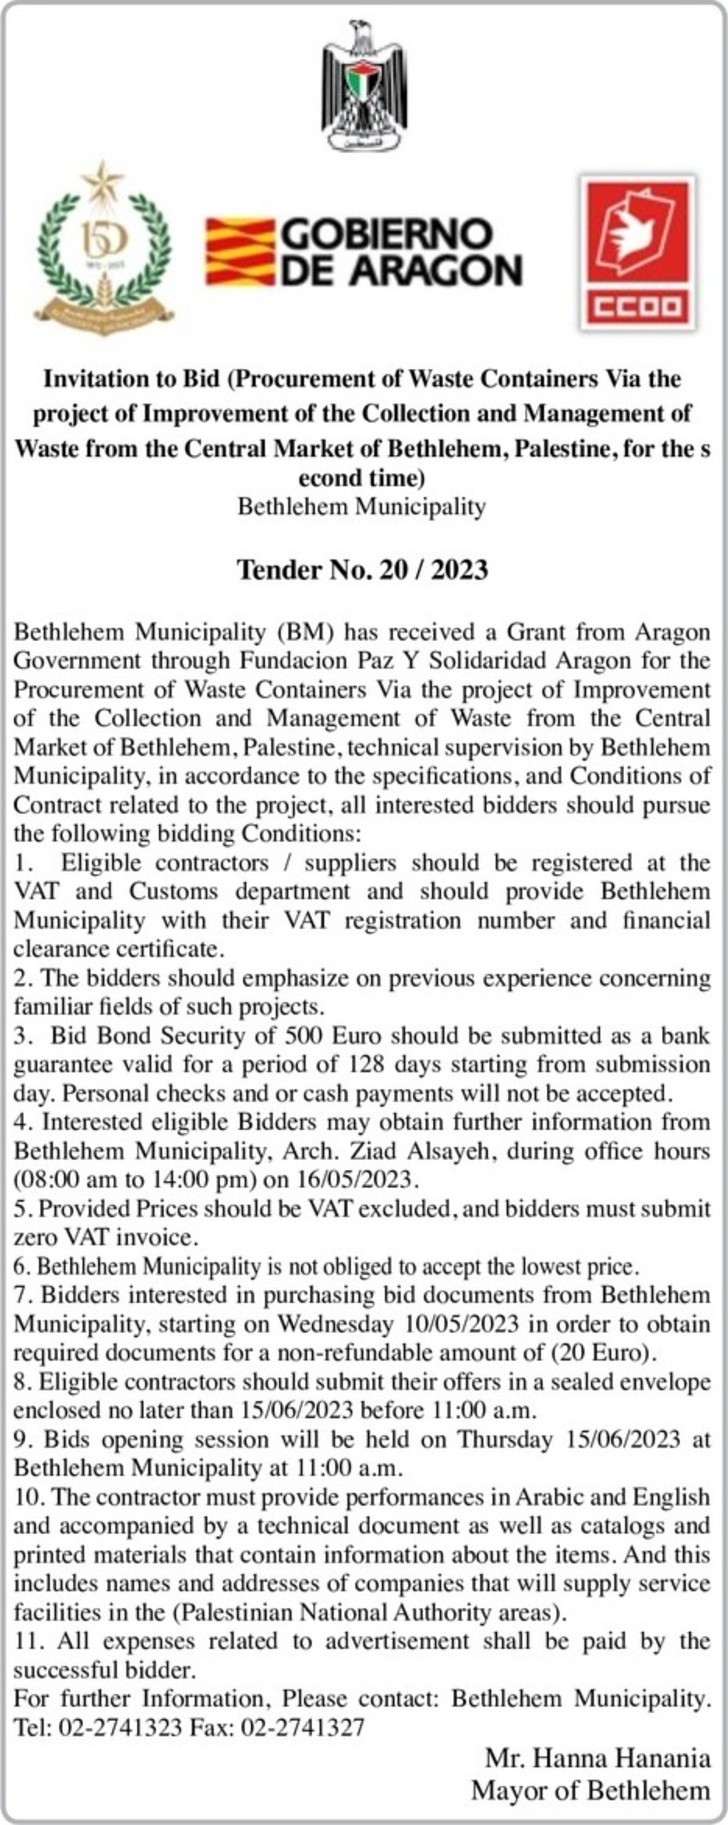  Procurement of Waste Containers 